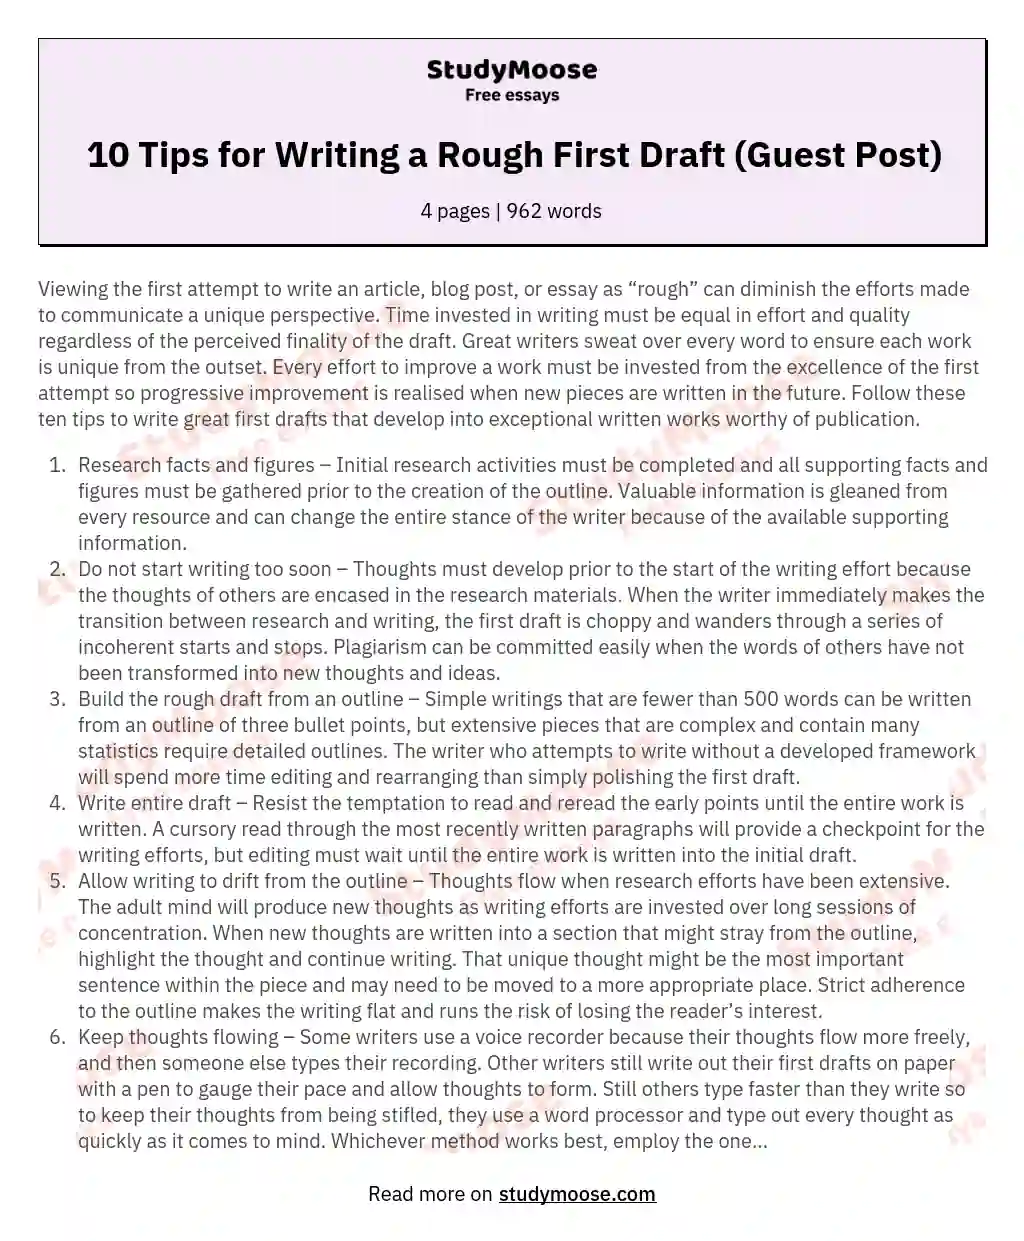 10 Tips for Writing a Rough First Draft (Guest Post)